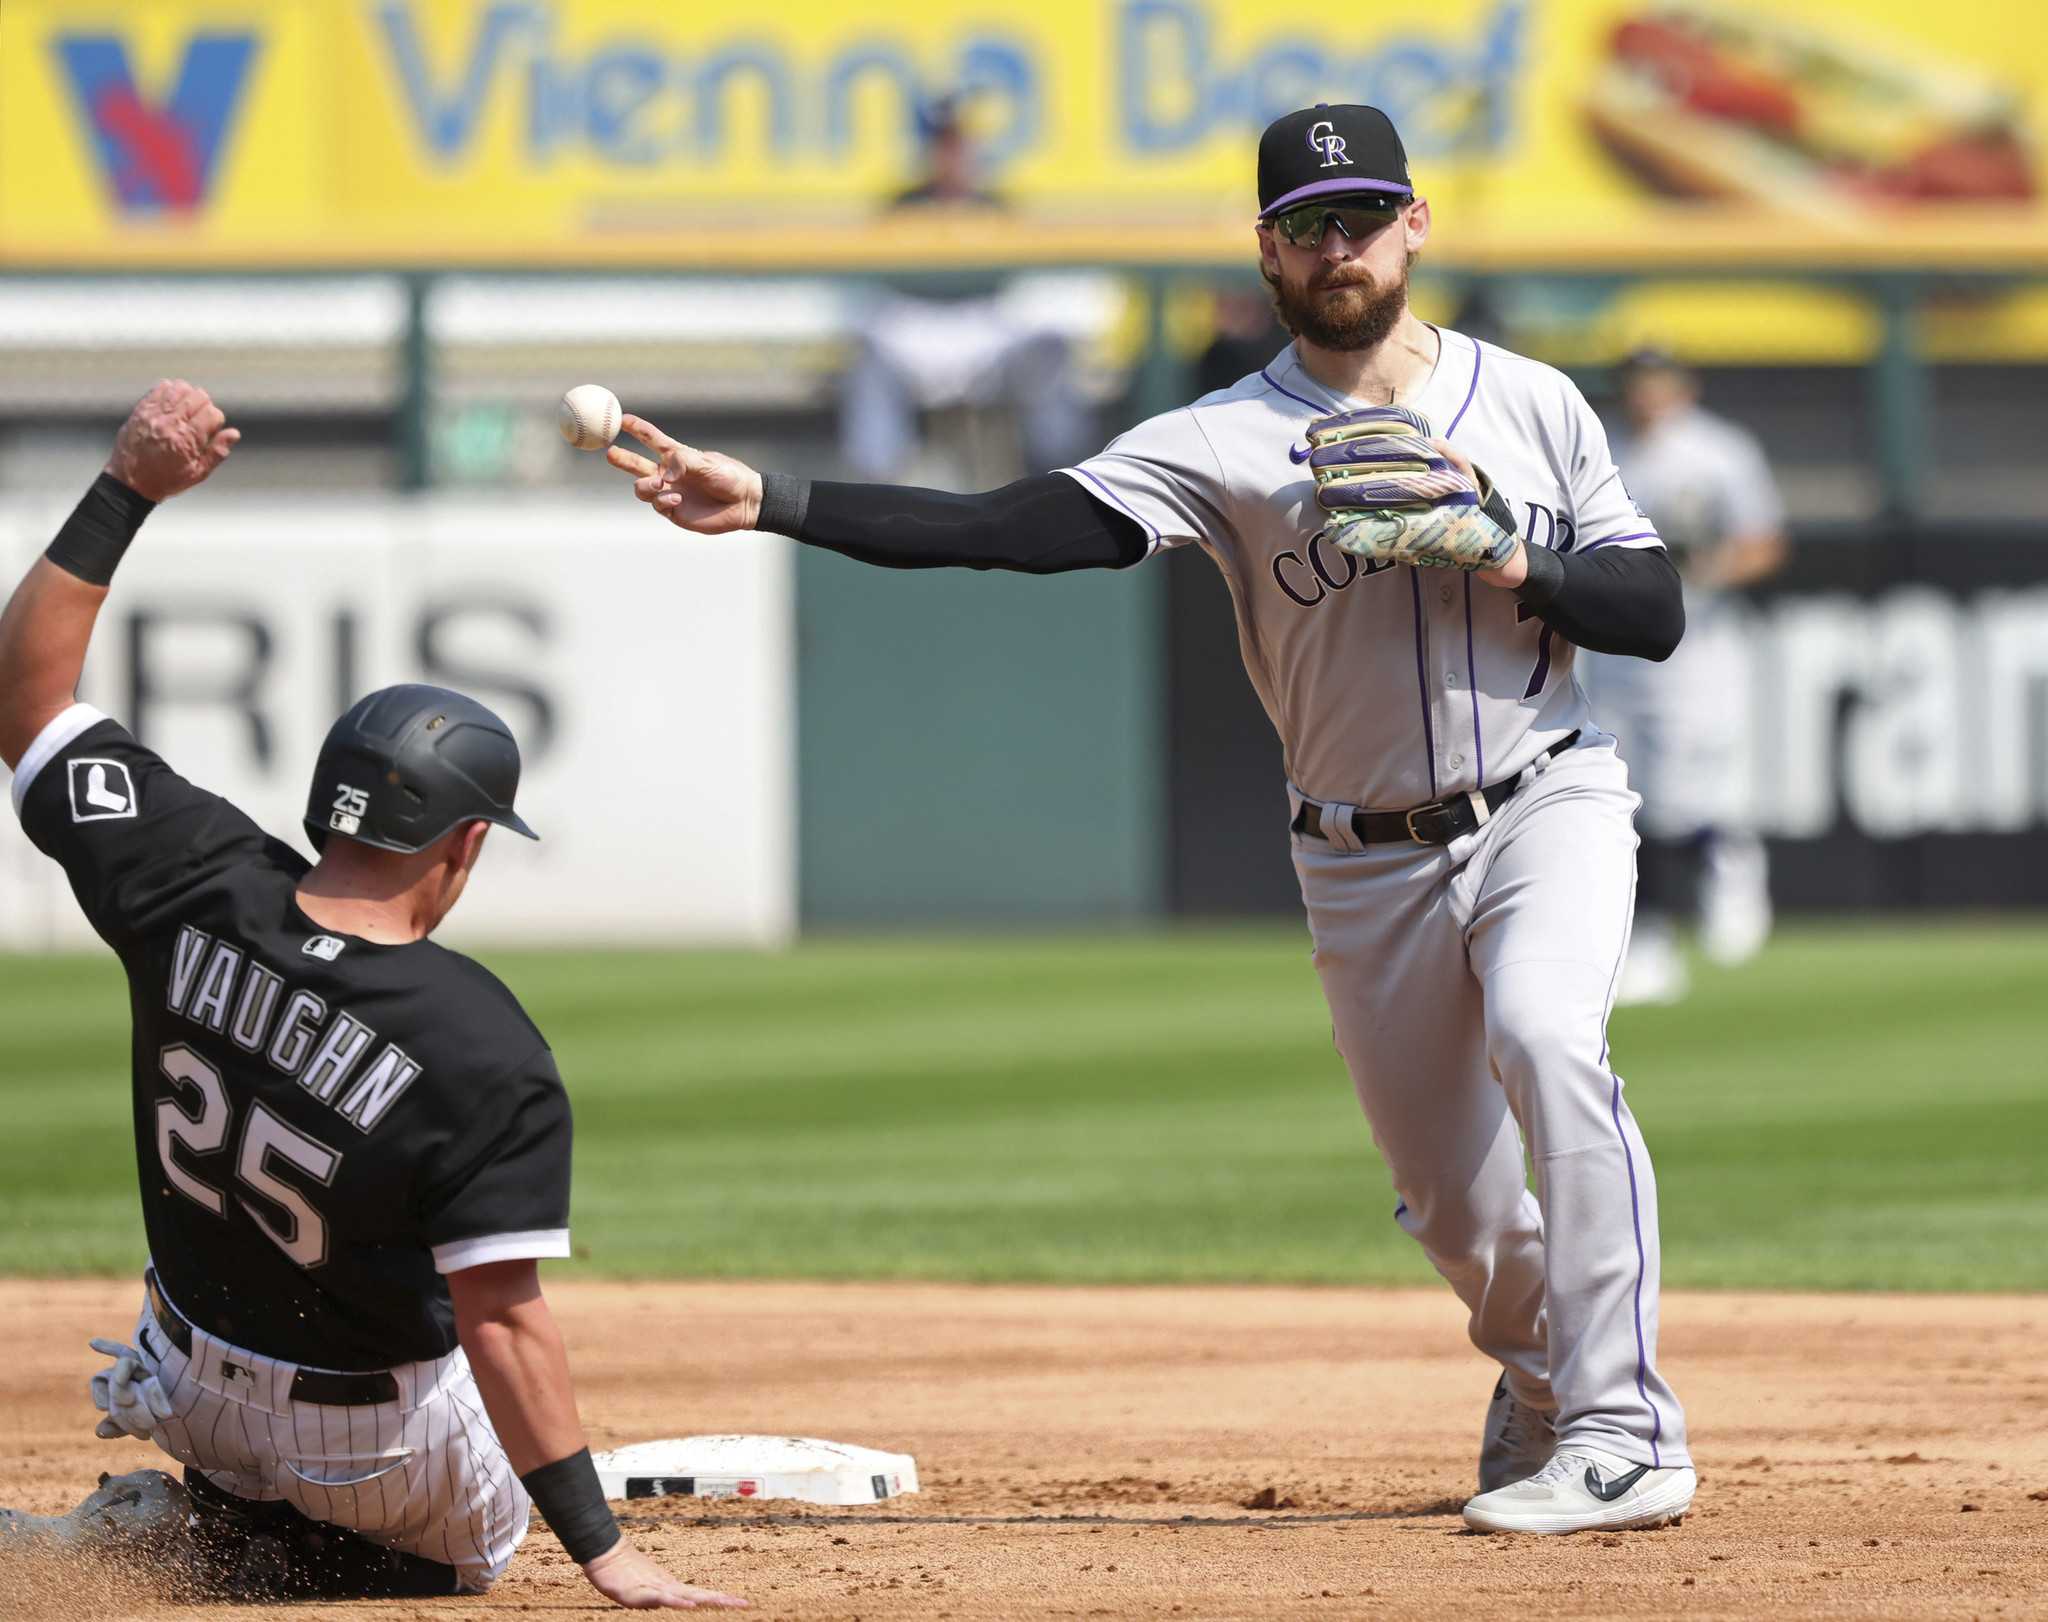 Freeland outduels Cease, Rockies blank White Sox 3-0